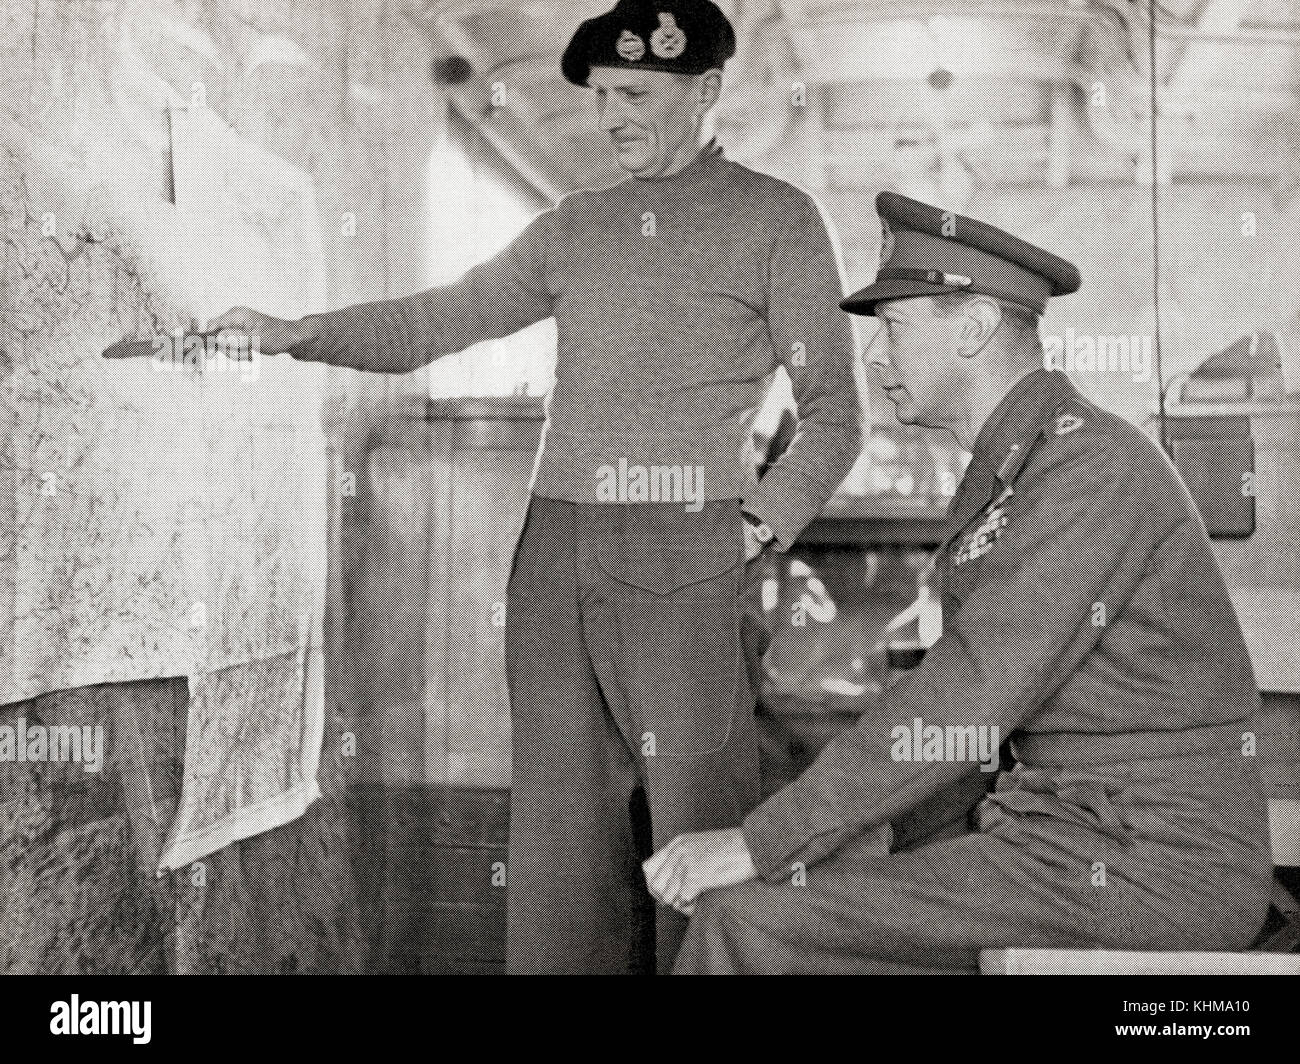 King George VI in the map lorry at Field-Marshal Montgomery's H.Q. in Holland, 1940. Left, Field Marshal Bernard Law Montgomery, 1st Viscount Montgomery of Alamein, 1887 – 1976, nicknamed 'Monty' and the 'Spartan General'.  Senior British Army officer, right, George VI, 1895 – 1952.  King of the United Kingdom and the Dominions of the British Commonwealth. Stock Photo